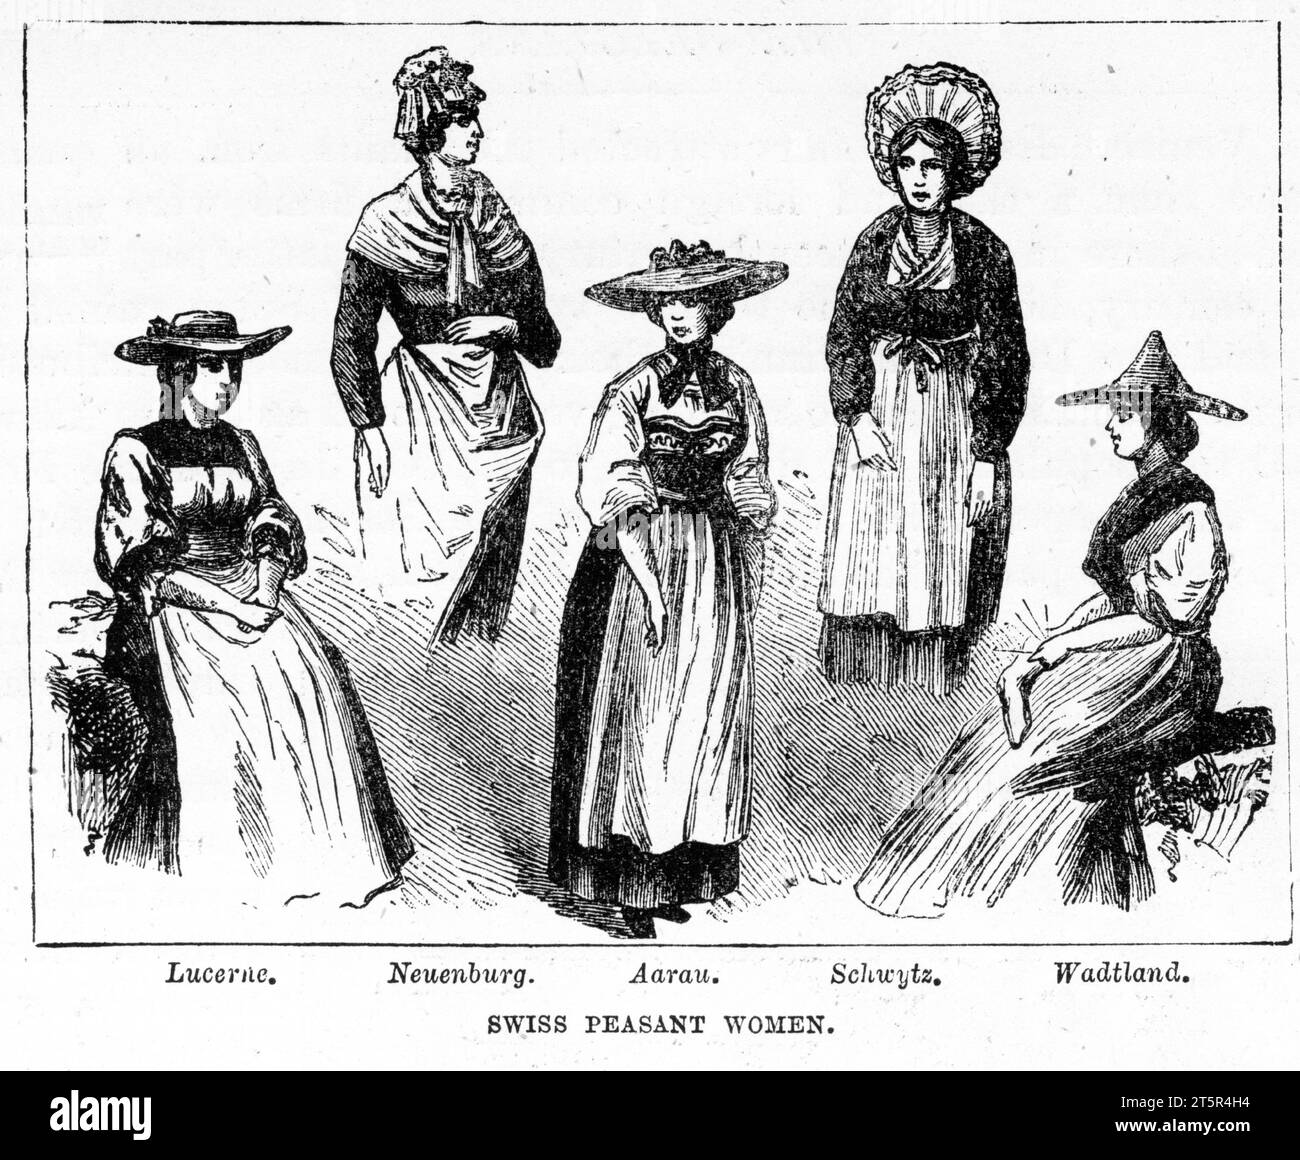 Engraved portrait of Swiss peasant women from Lucerne, Neuenburg, Aarau, Schwytz and Wadtland in traditional costumes. Published circa 1887 Stock Photo